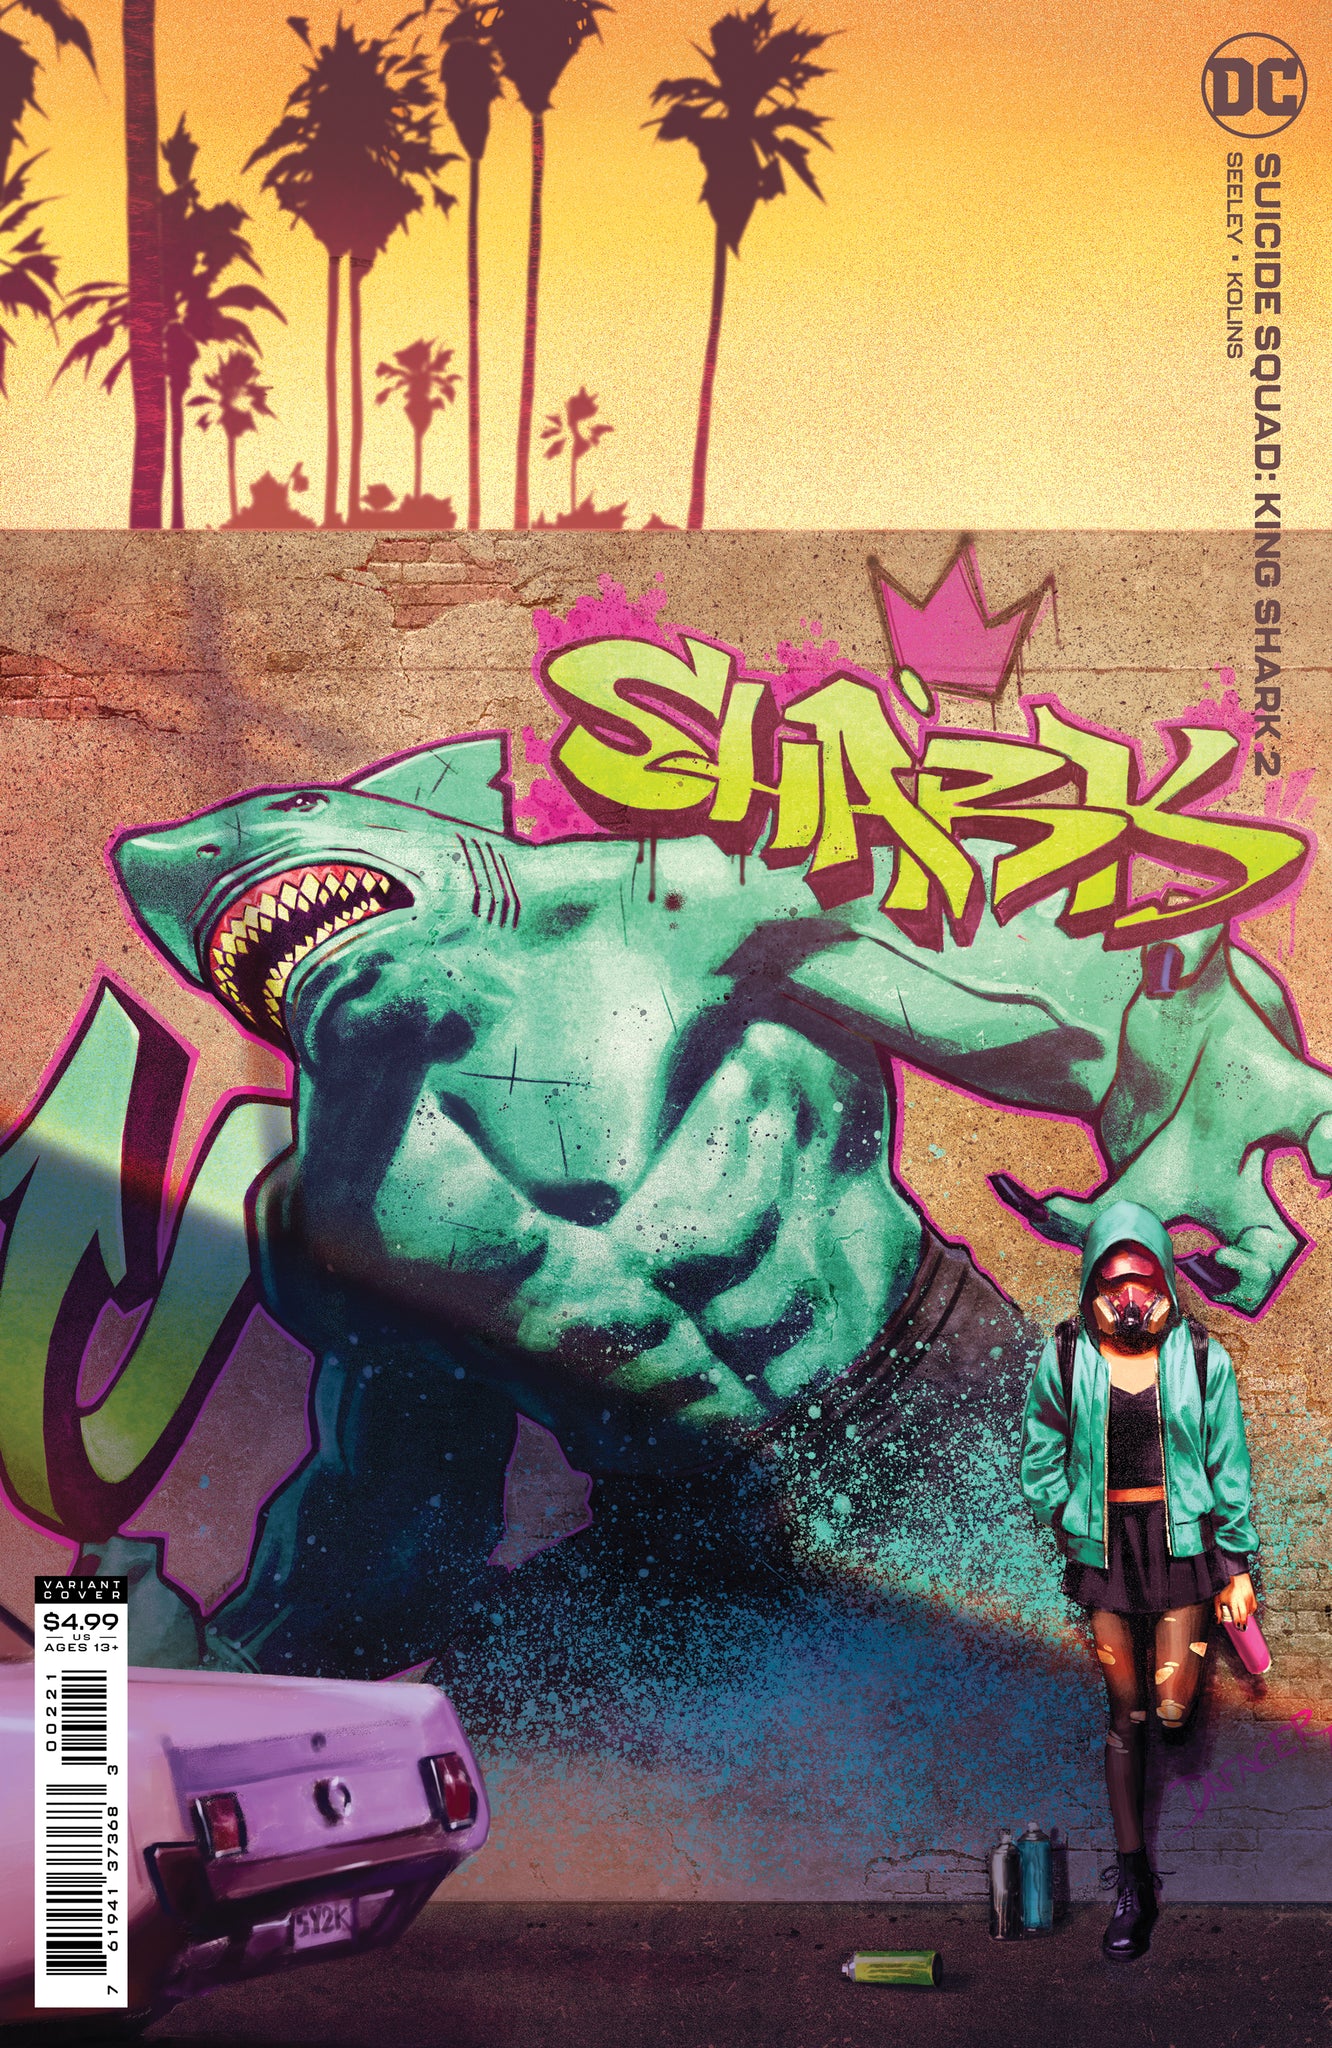 SUICIDE SQUAD KING SHARK #2 (OF 6)